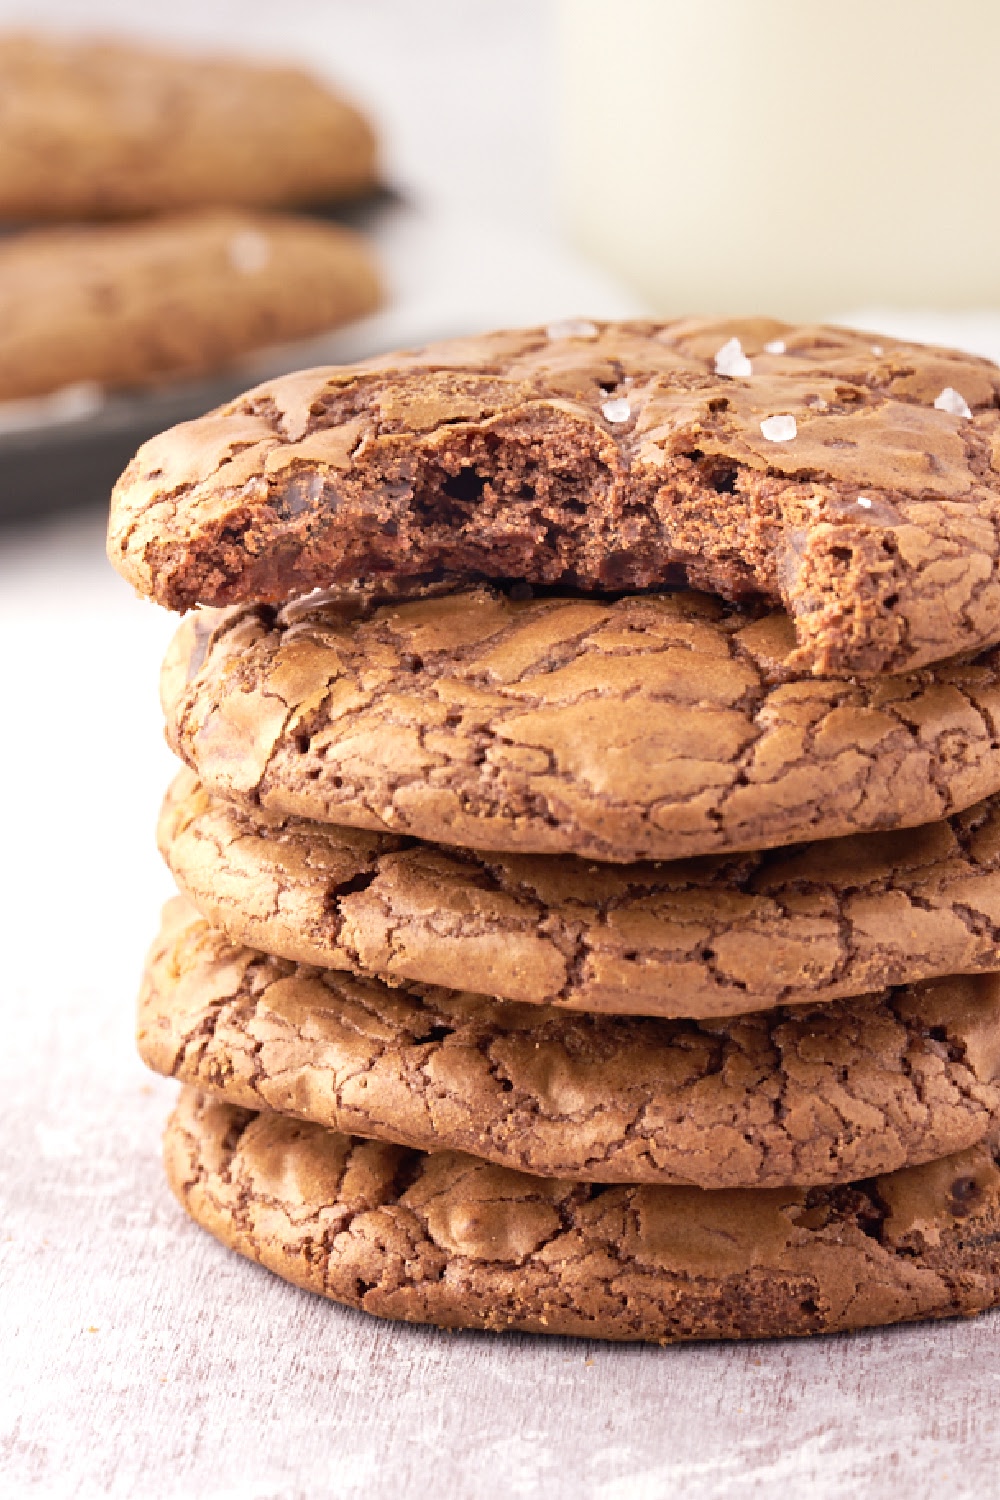 Brownie Cookies in a stack with the top cookie missing a bite to show the gooey inside.